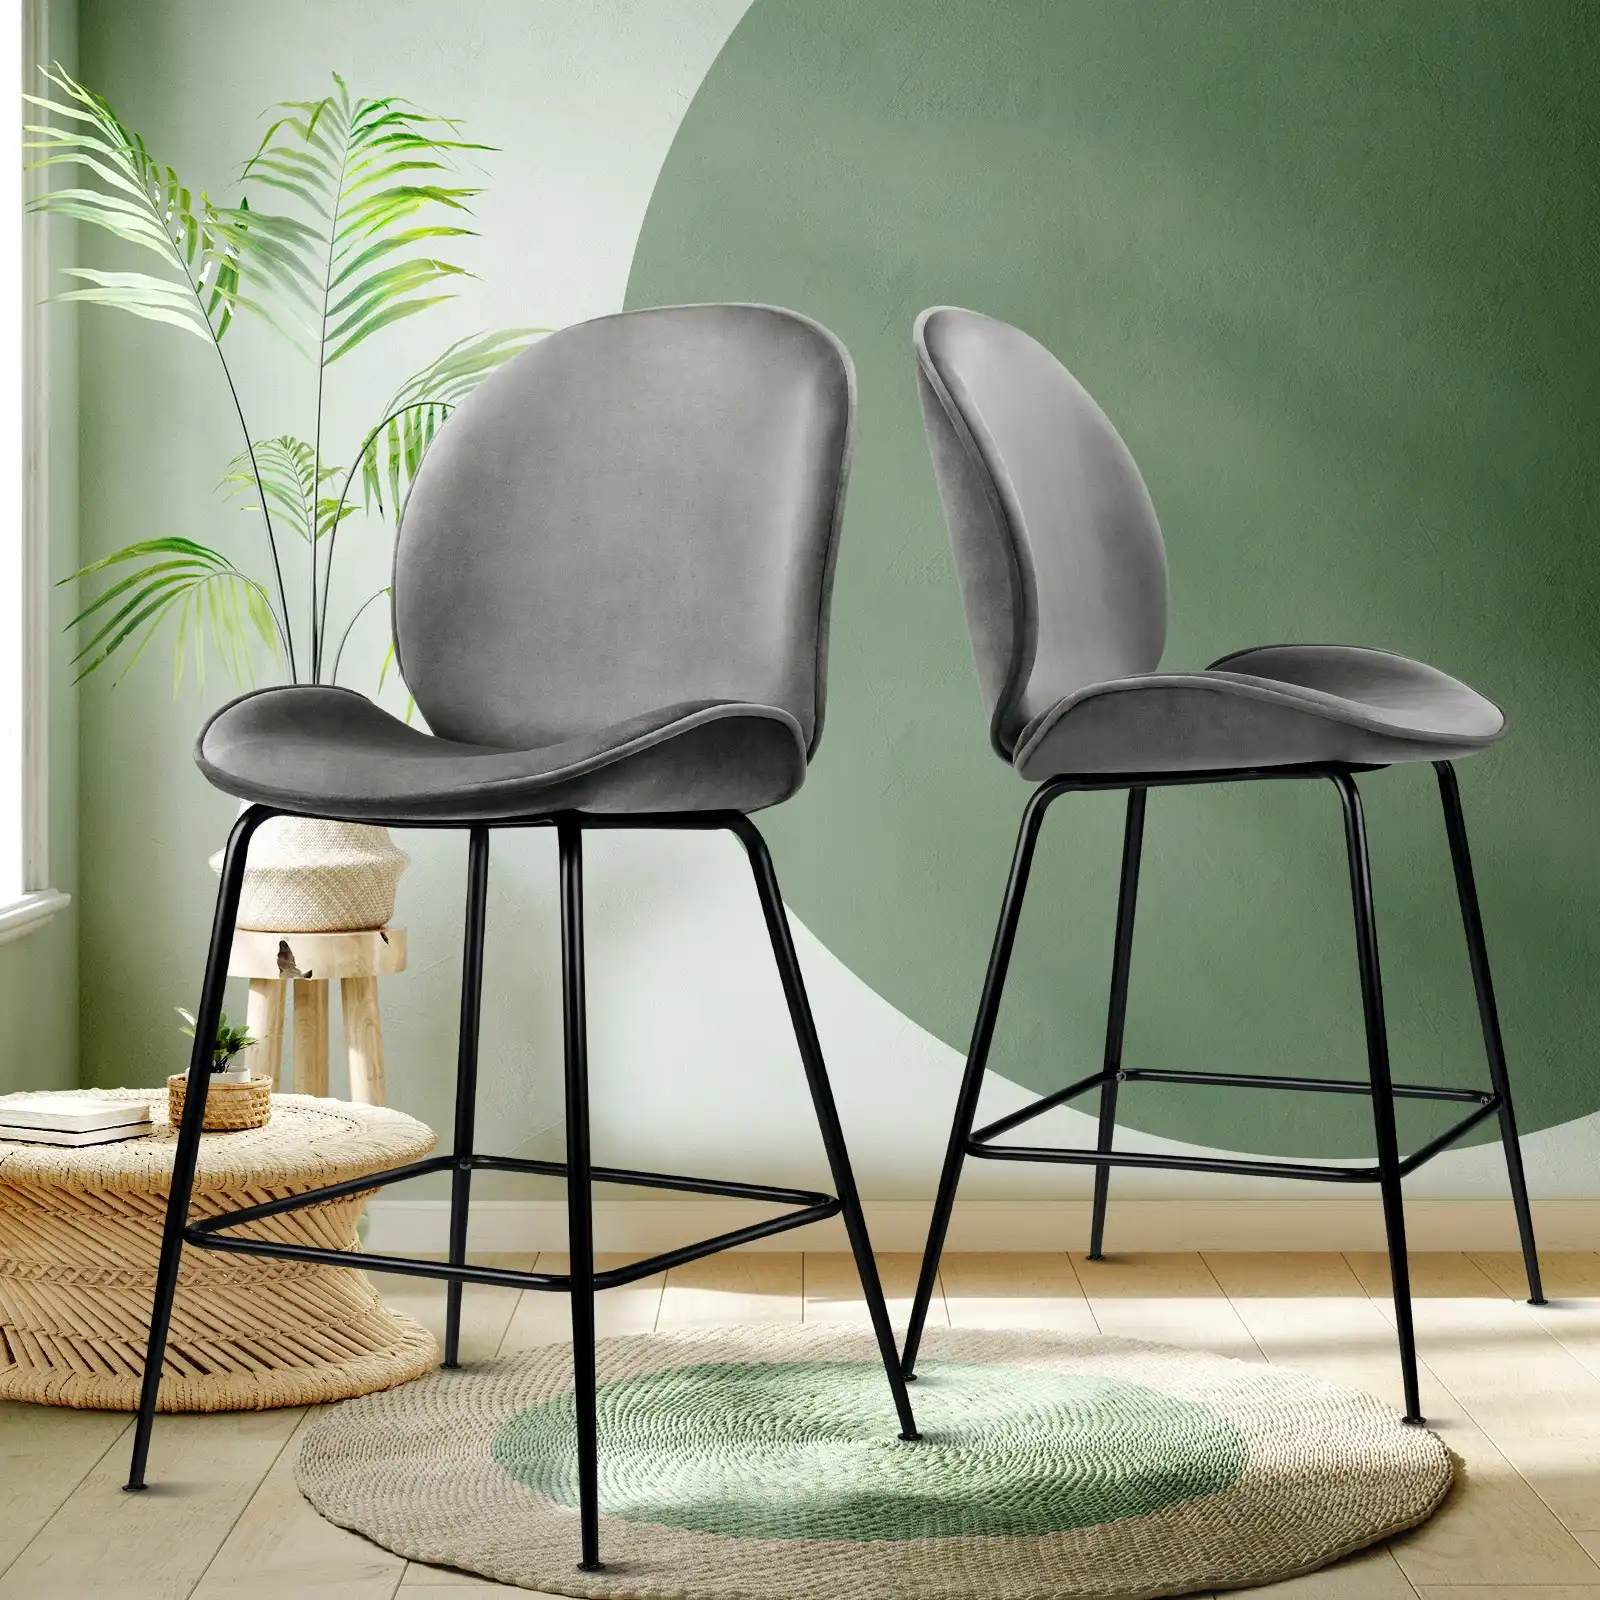 Oikiture Bar Stools Kitchen Stool Chairs Barstool Dining Chair Velvet Metal Grey